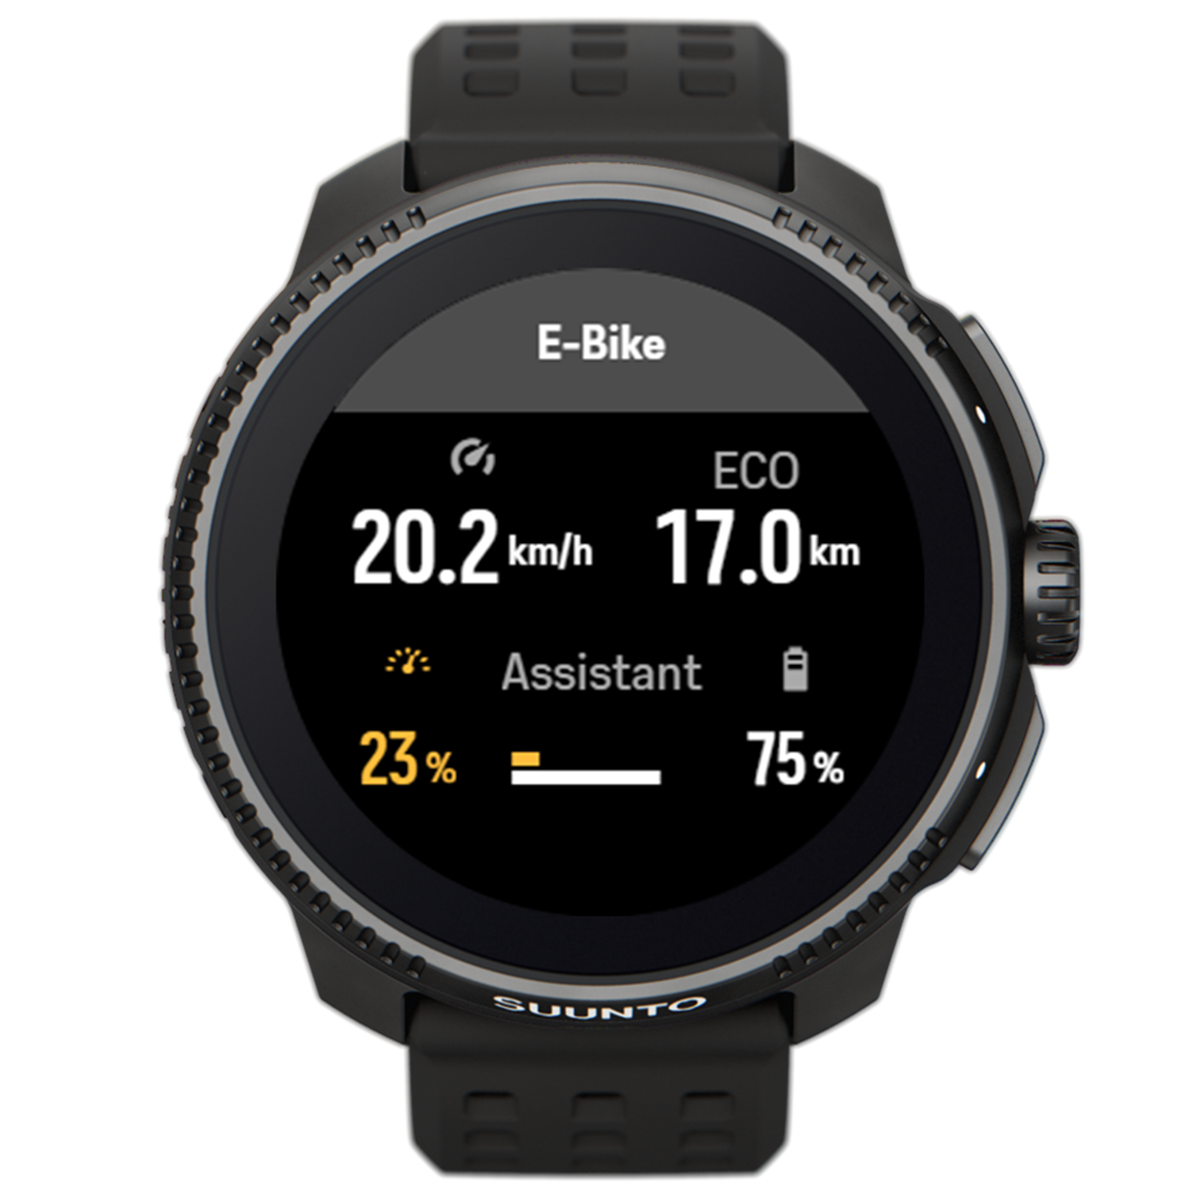 You can connect your Suunto with Shimano E- bike Systems bicycles.